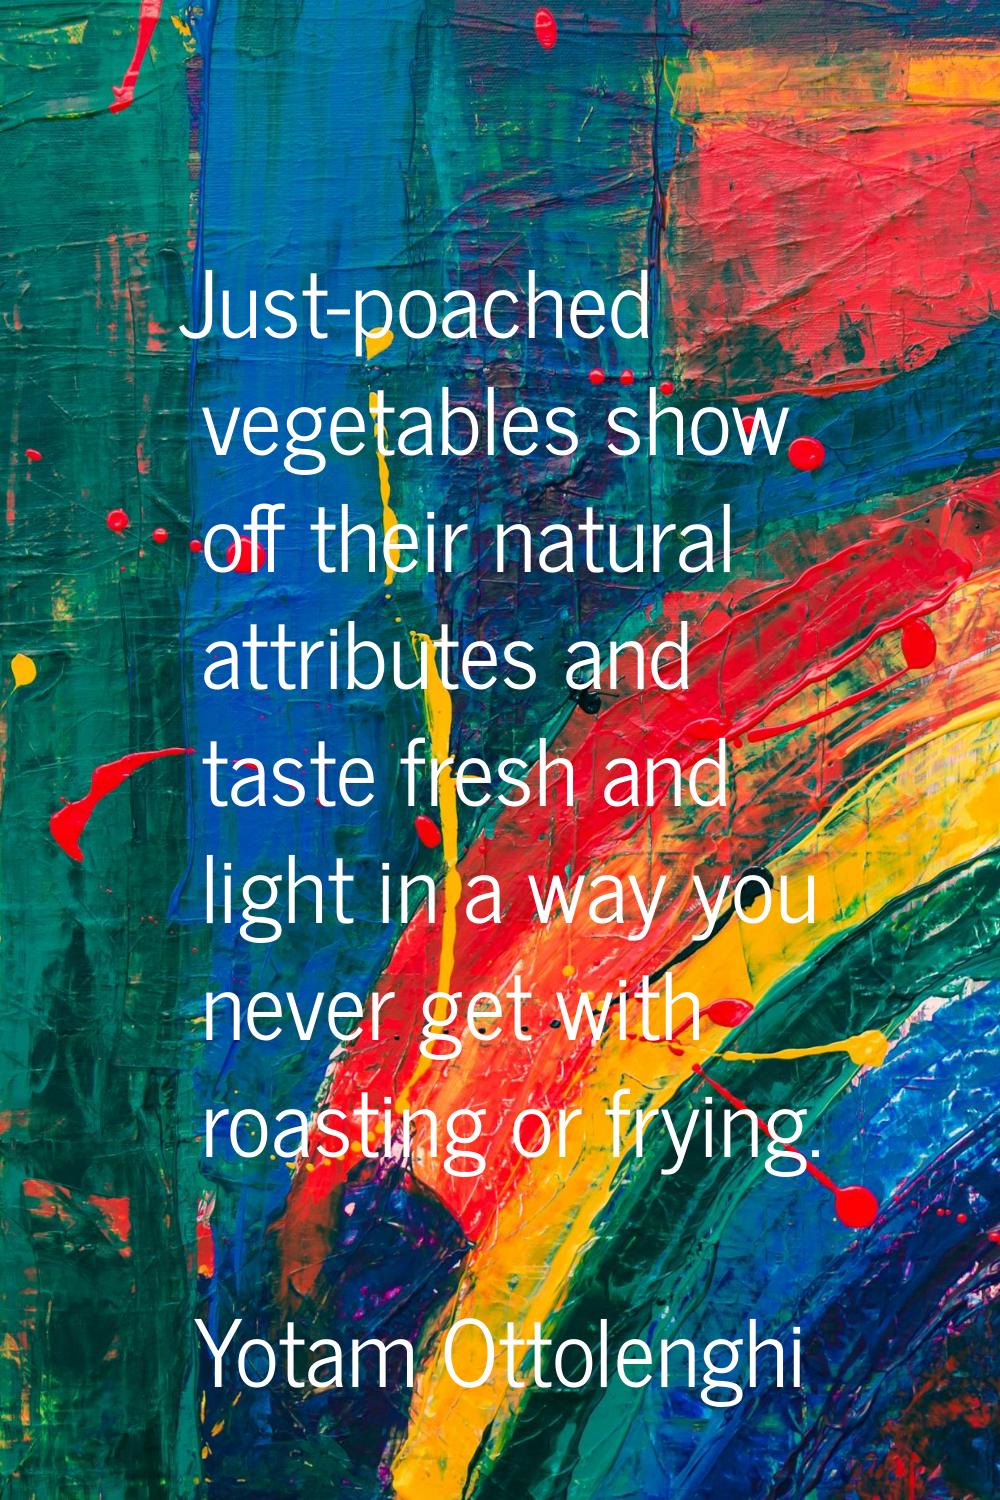 Just-poached vegetables show off their natural attributes and taste fresh and light in a way you ne